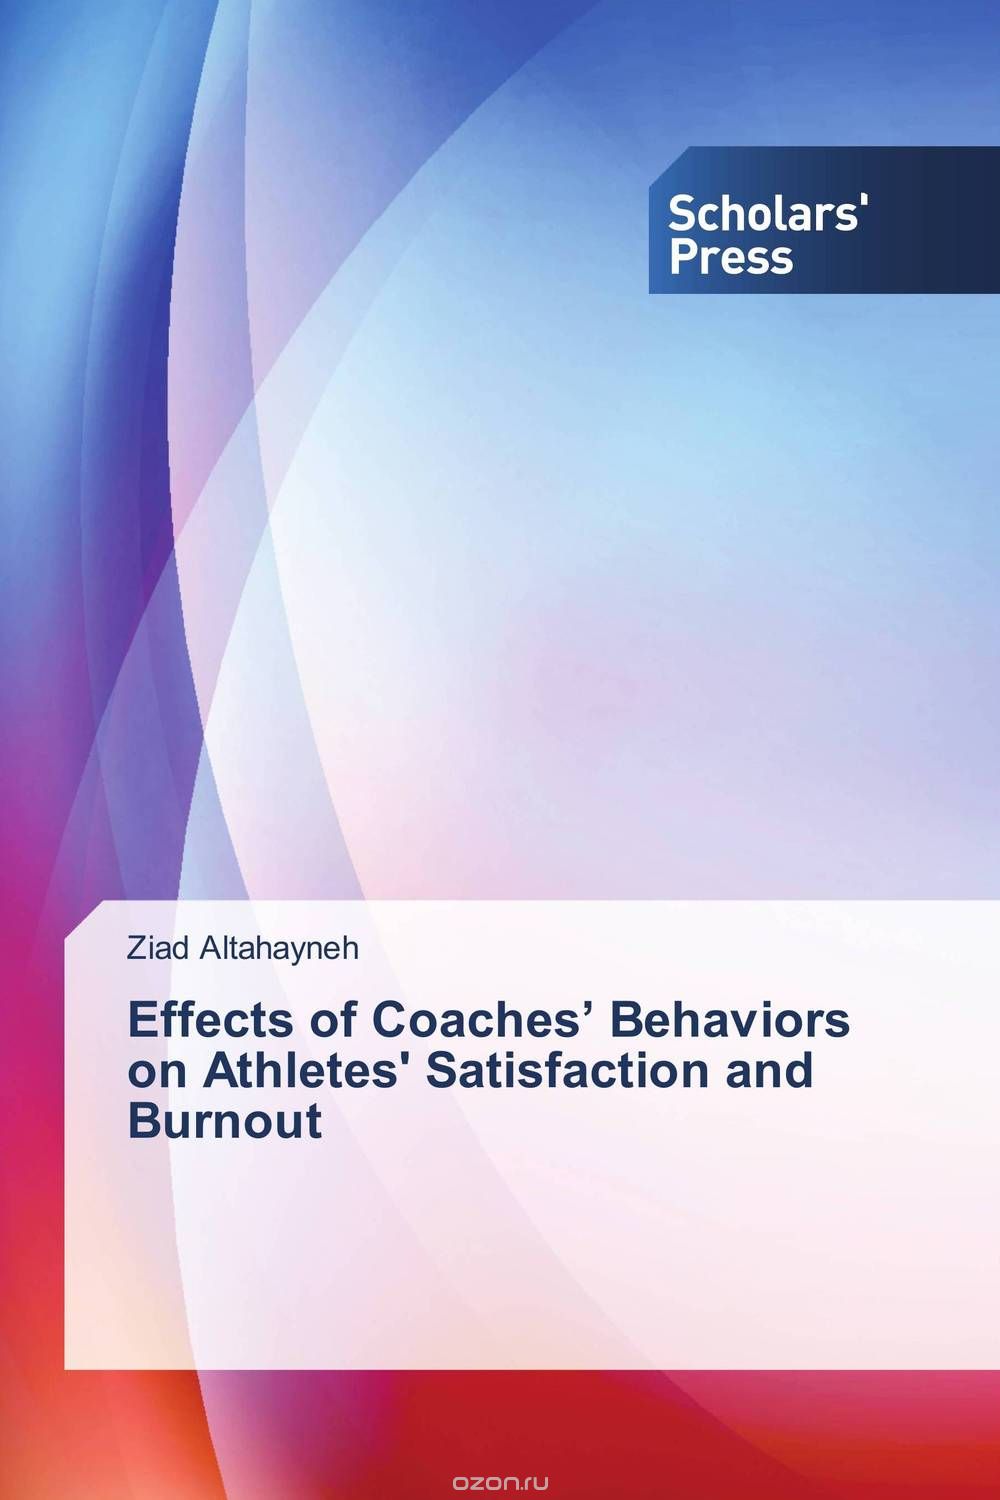 Effects of Coaches’ Behaviors on Athletes' Satisfaction and Burnout